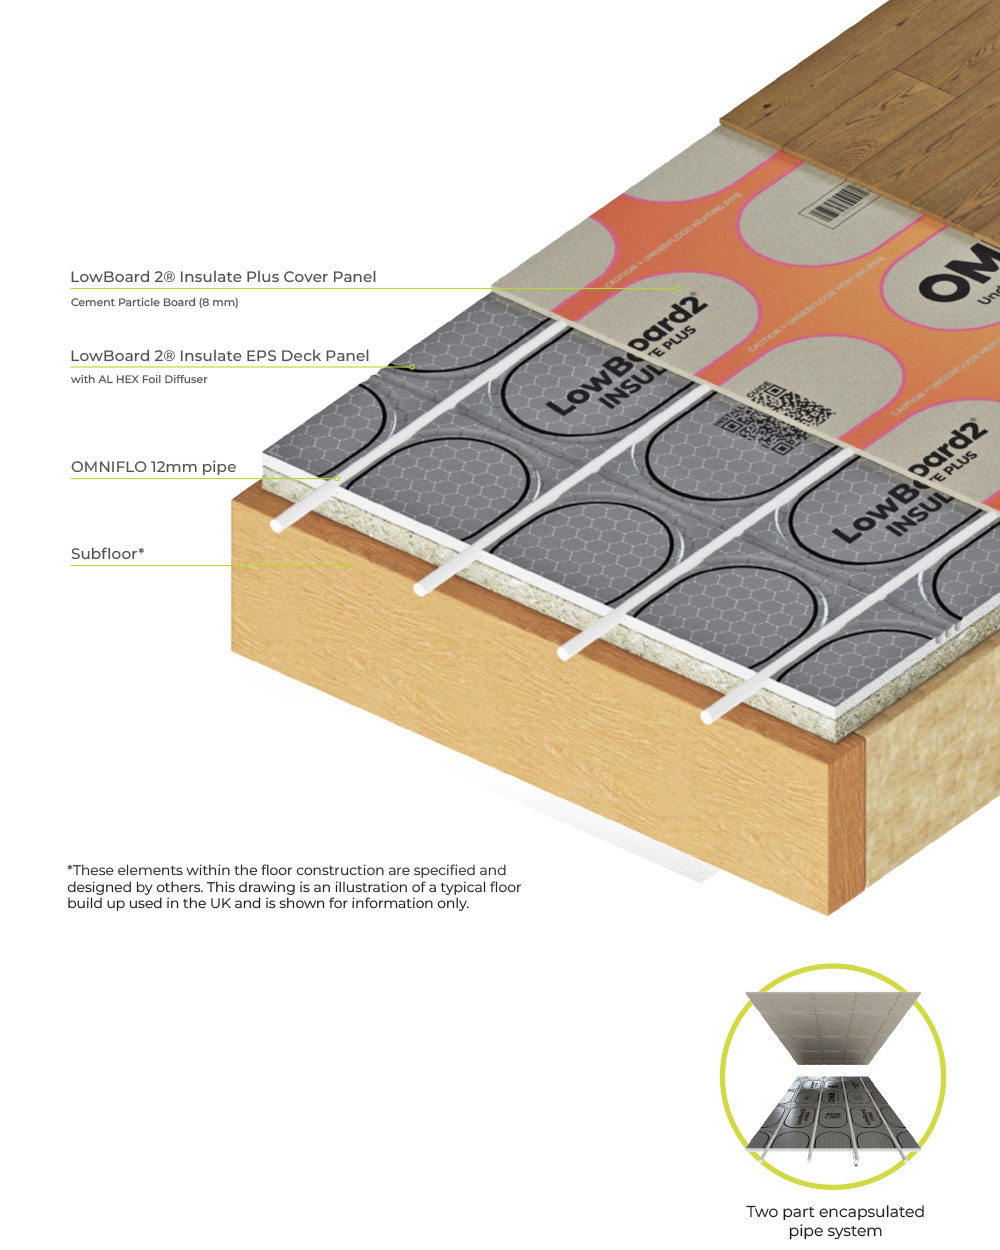 LowBoard 2® Insulate Plus – for Low Build Up floors